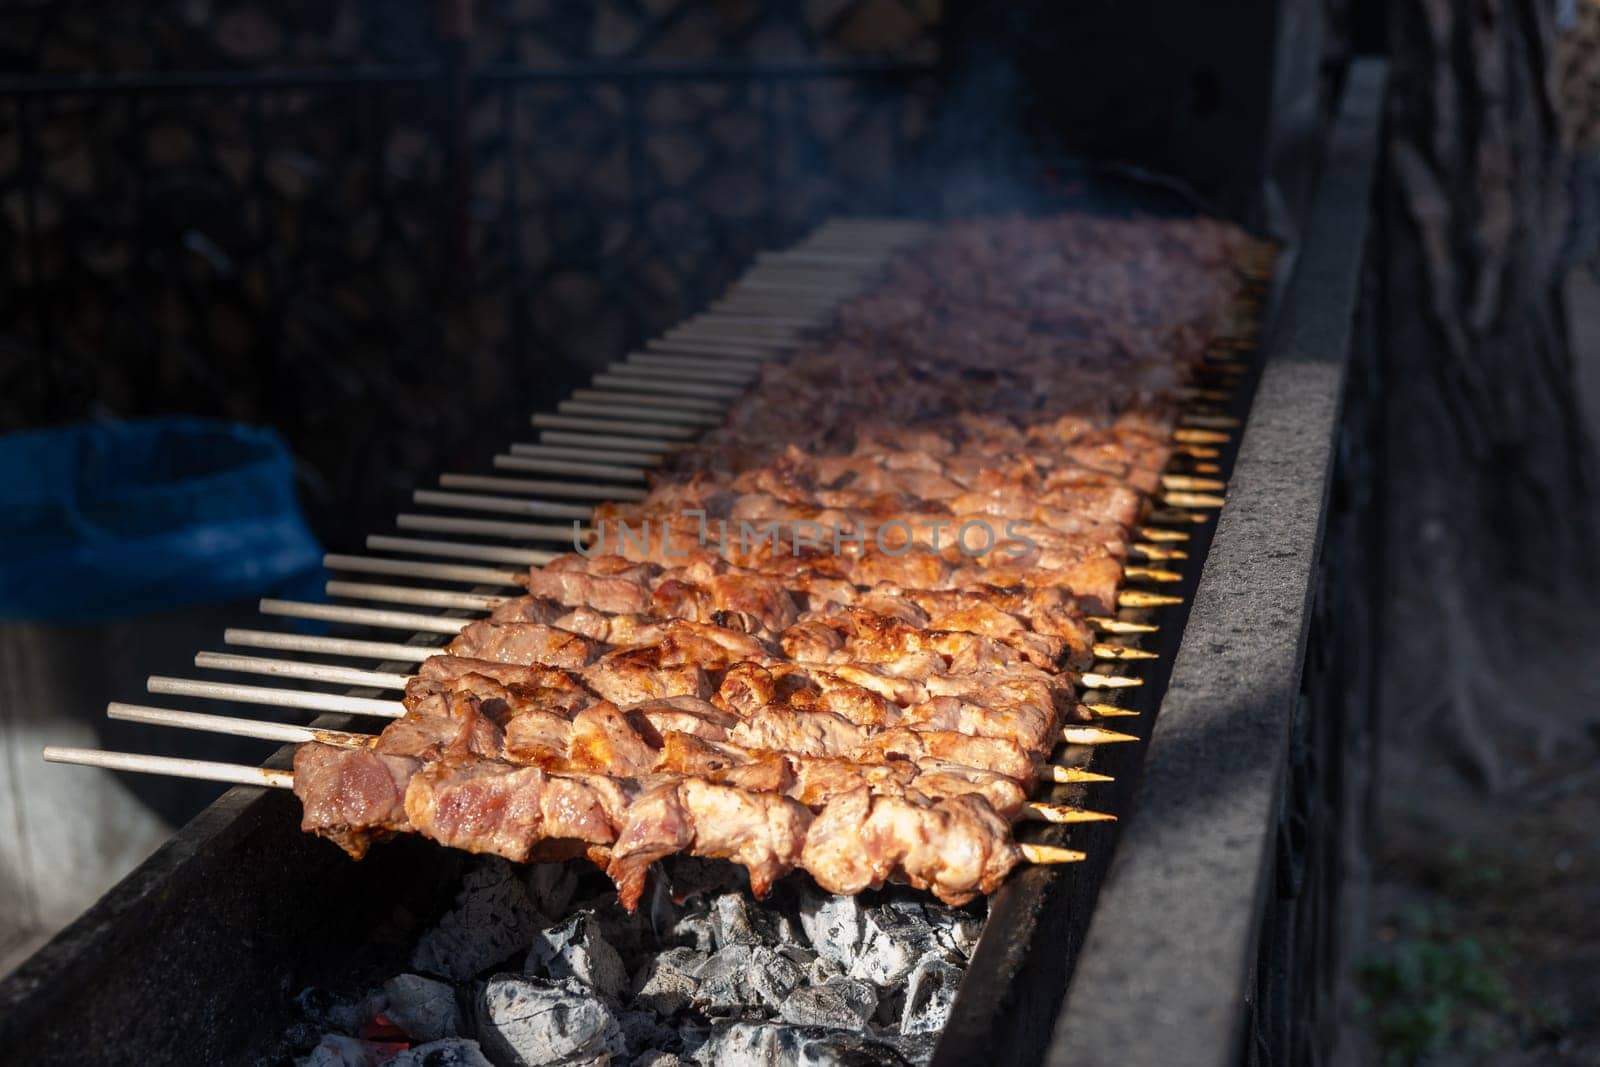 A lot of juicy meat kebabs in a row on the grill. Meat pieces strung on wooden skewers on the grill. The process of cooking kebabs with a lot of smoke. Cooking in nature